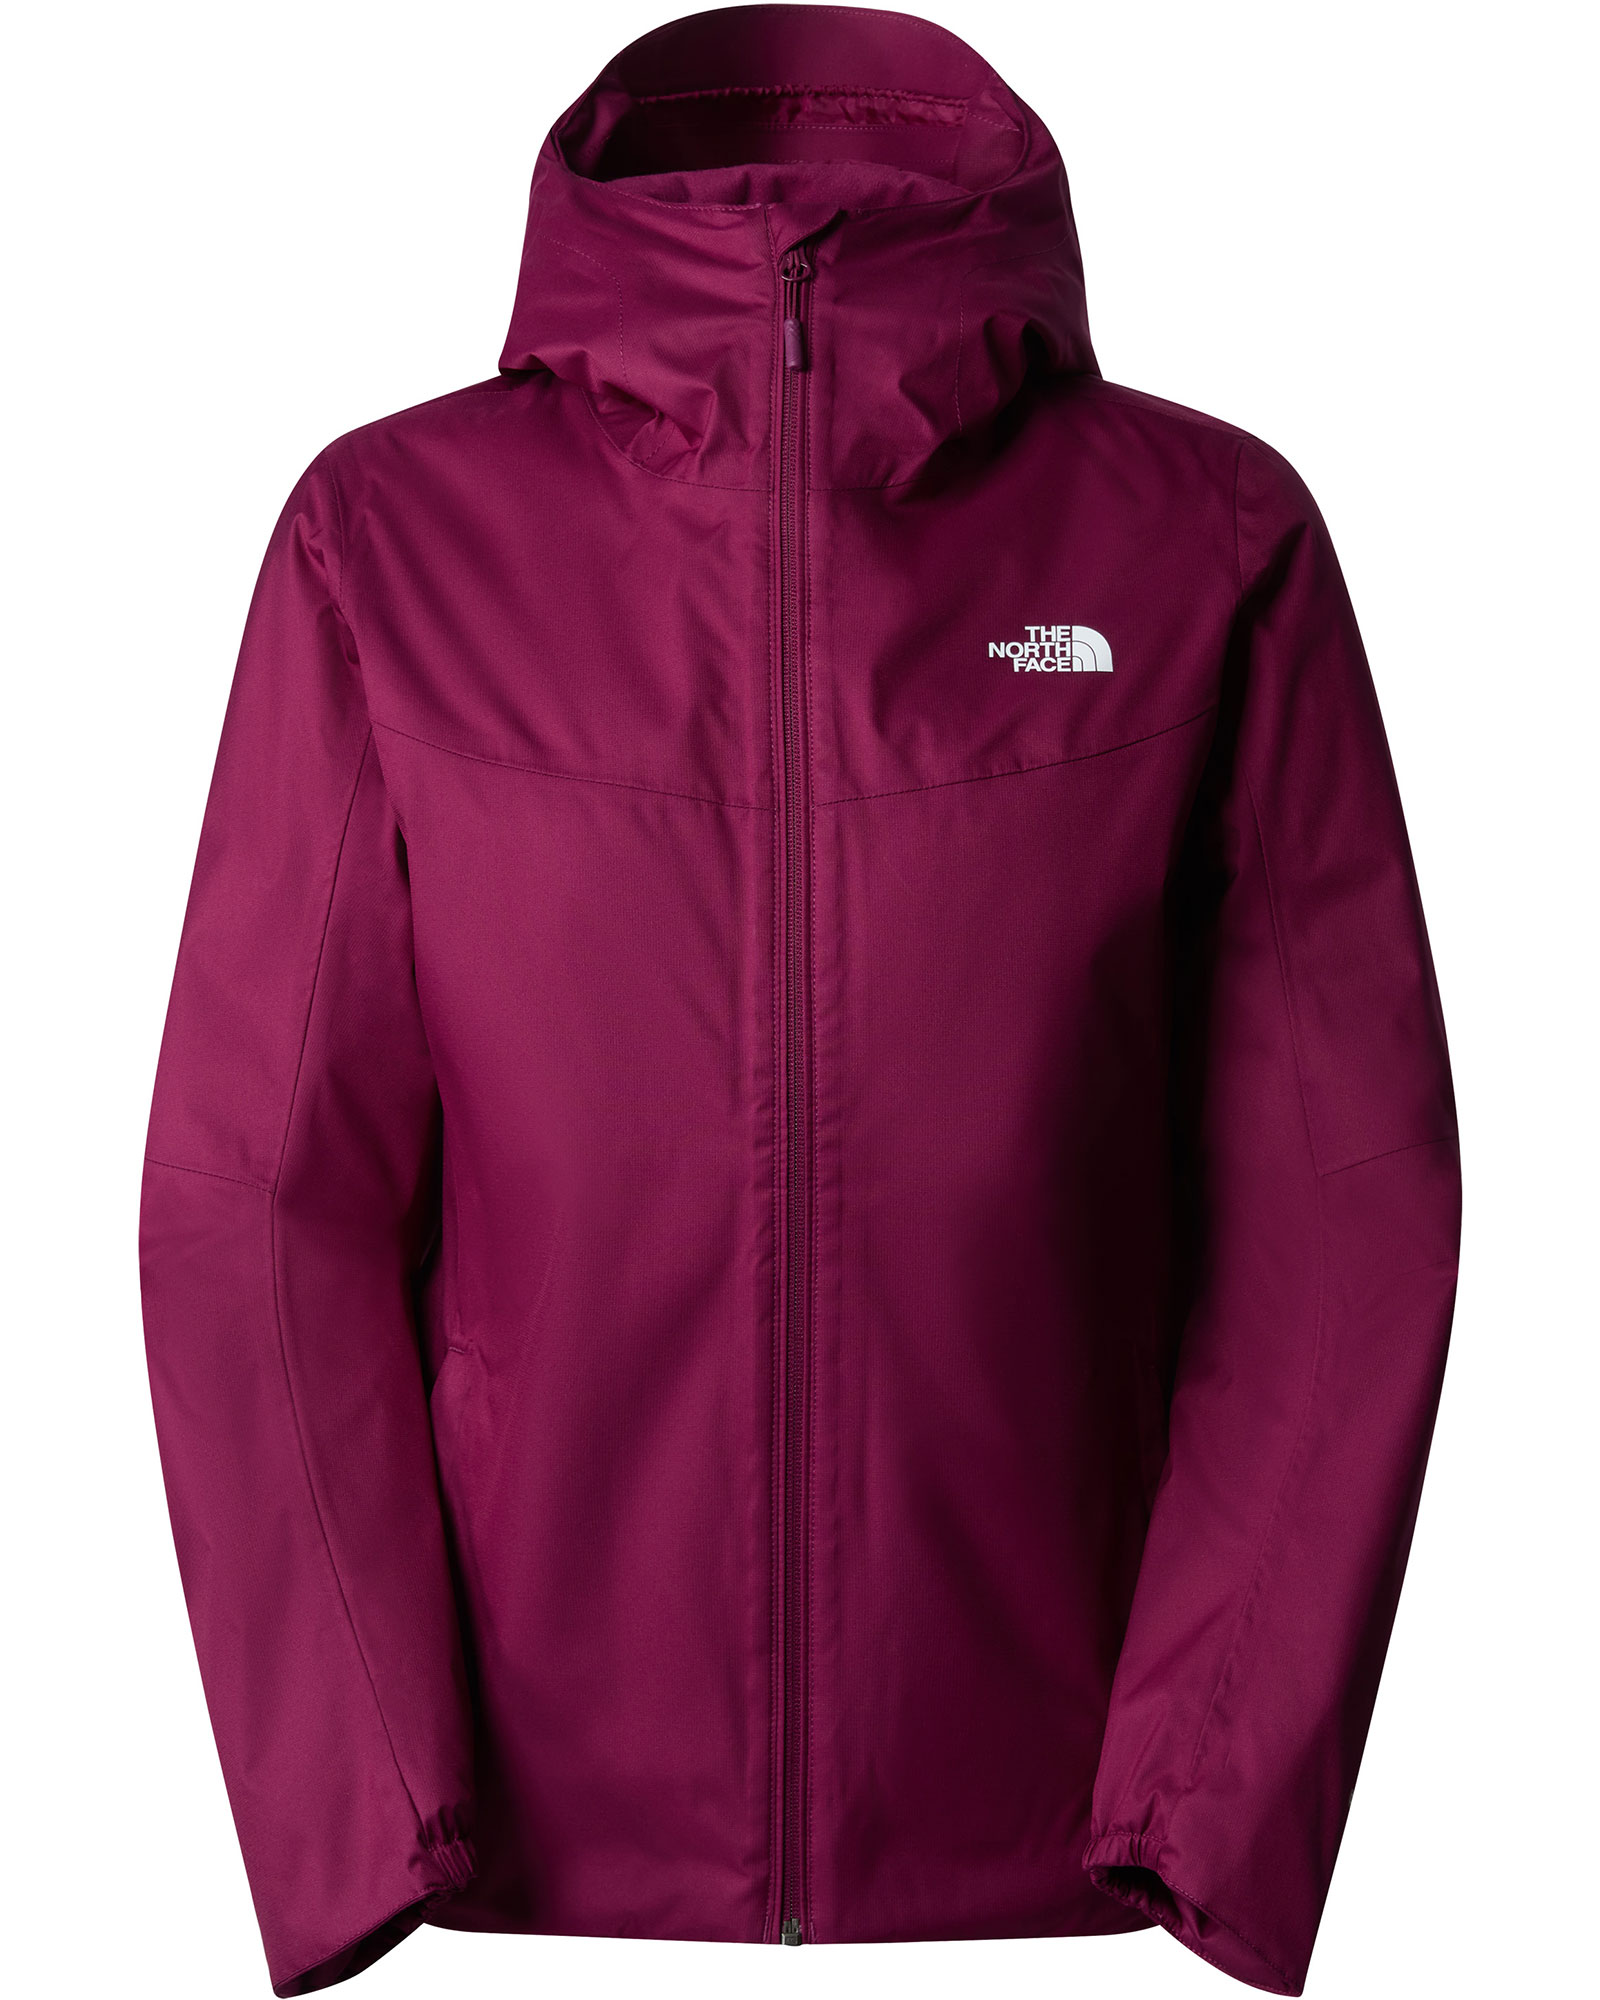 The North Face Quest DryVent Women’s Insulated Jacket - Boysenberry L